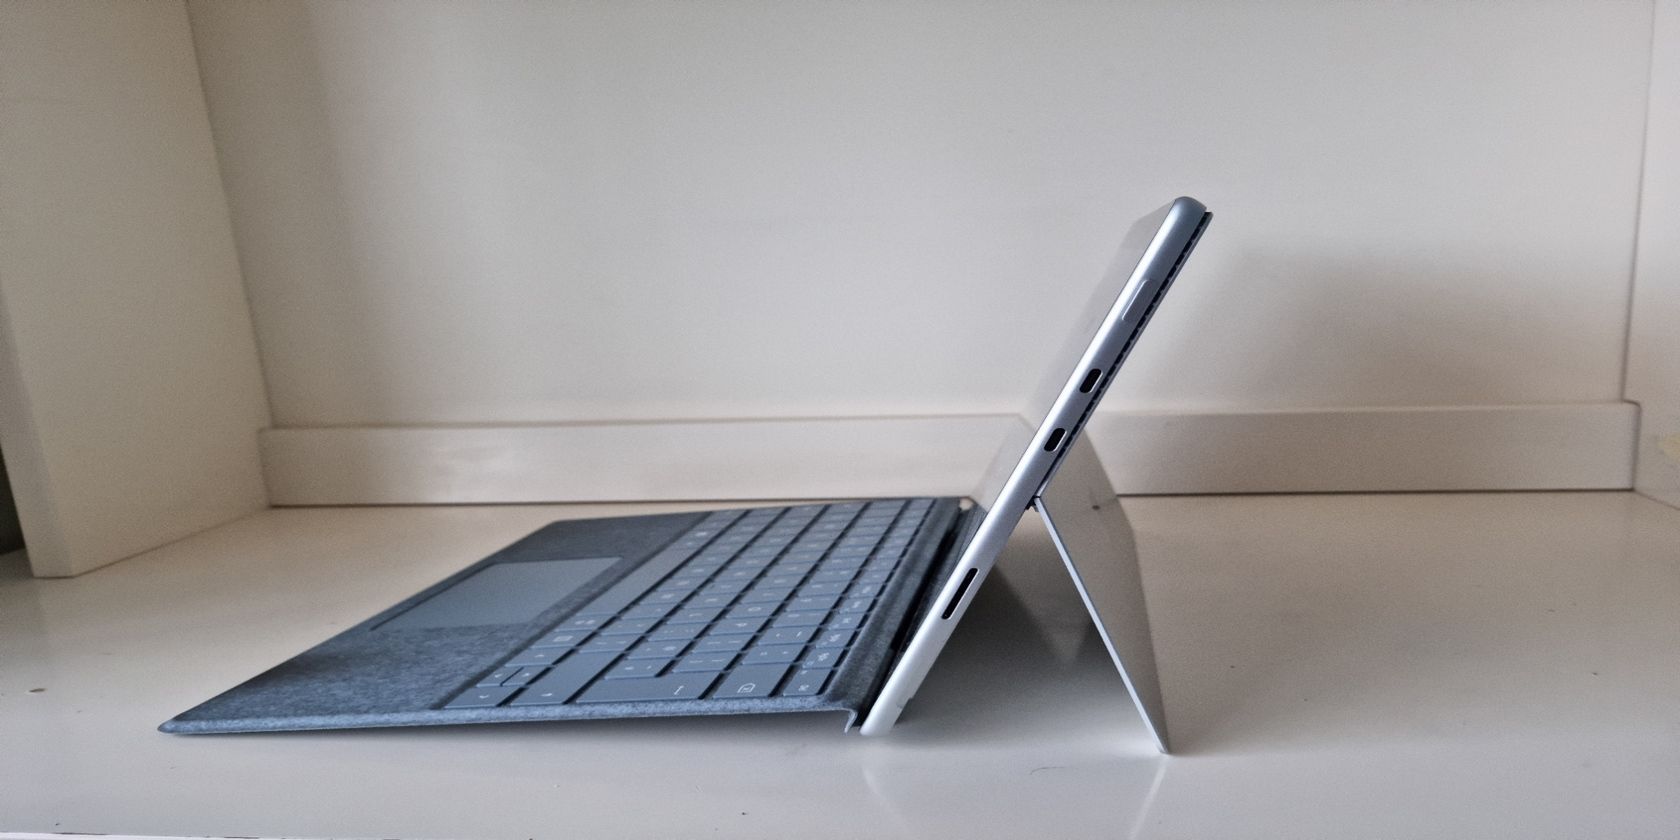 surface pro 8 featured on desk